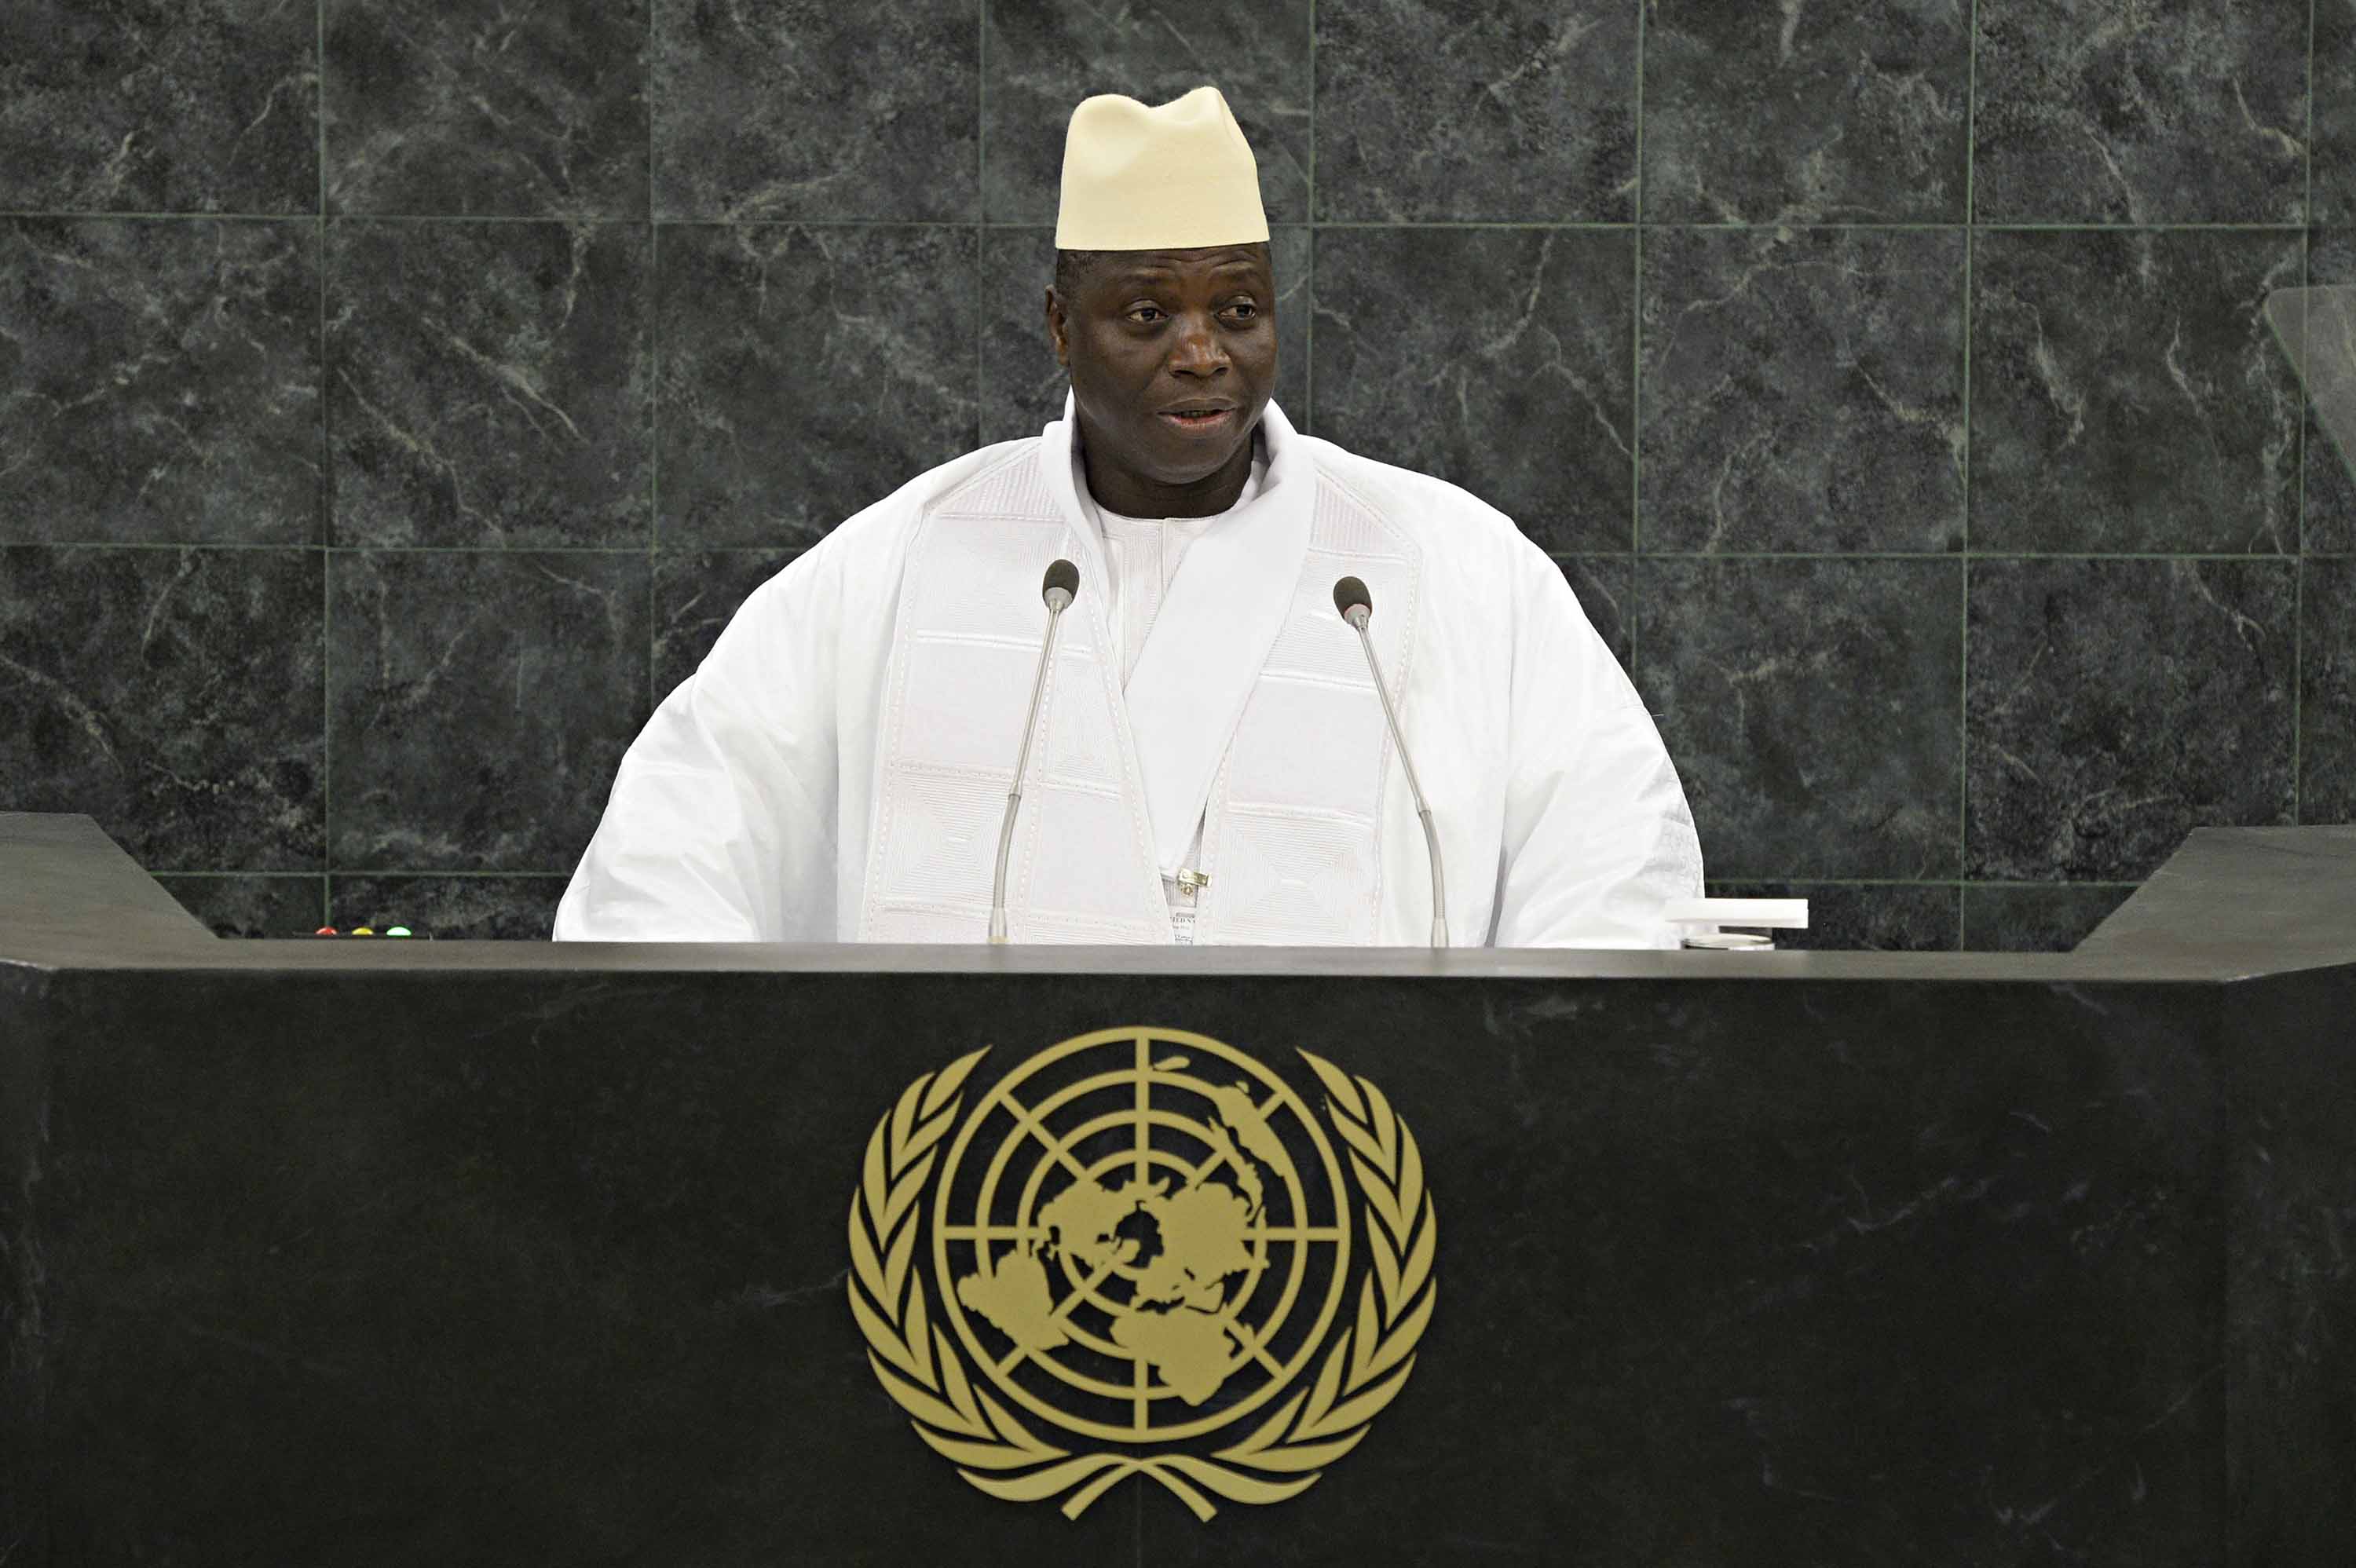 Gambia's former president Yahya Jammeh accused of rape and sexual assault |  CNN